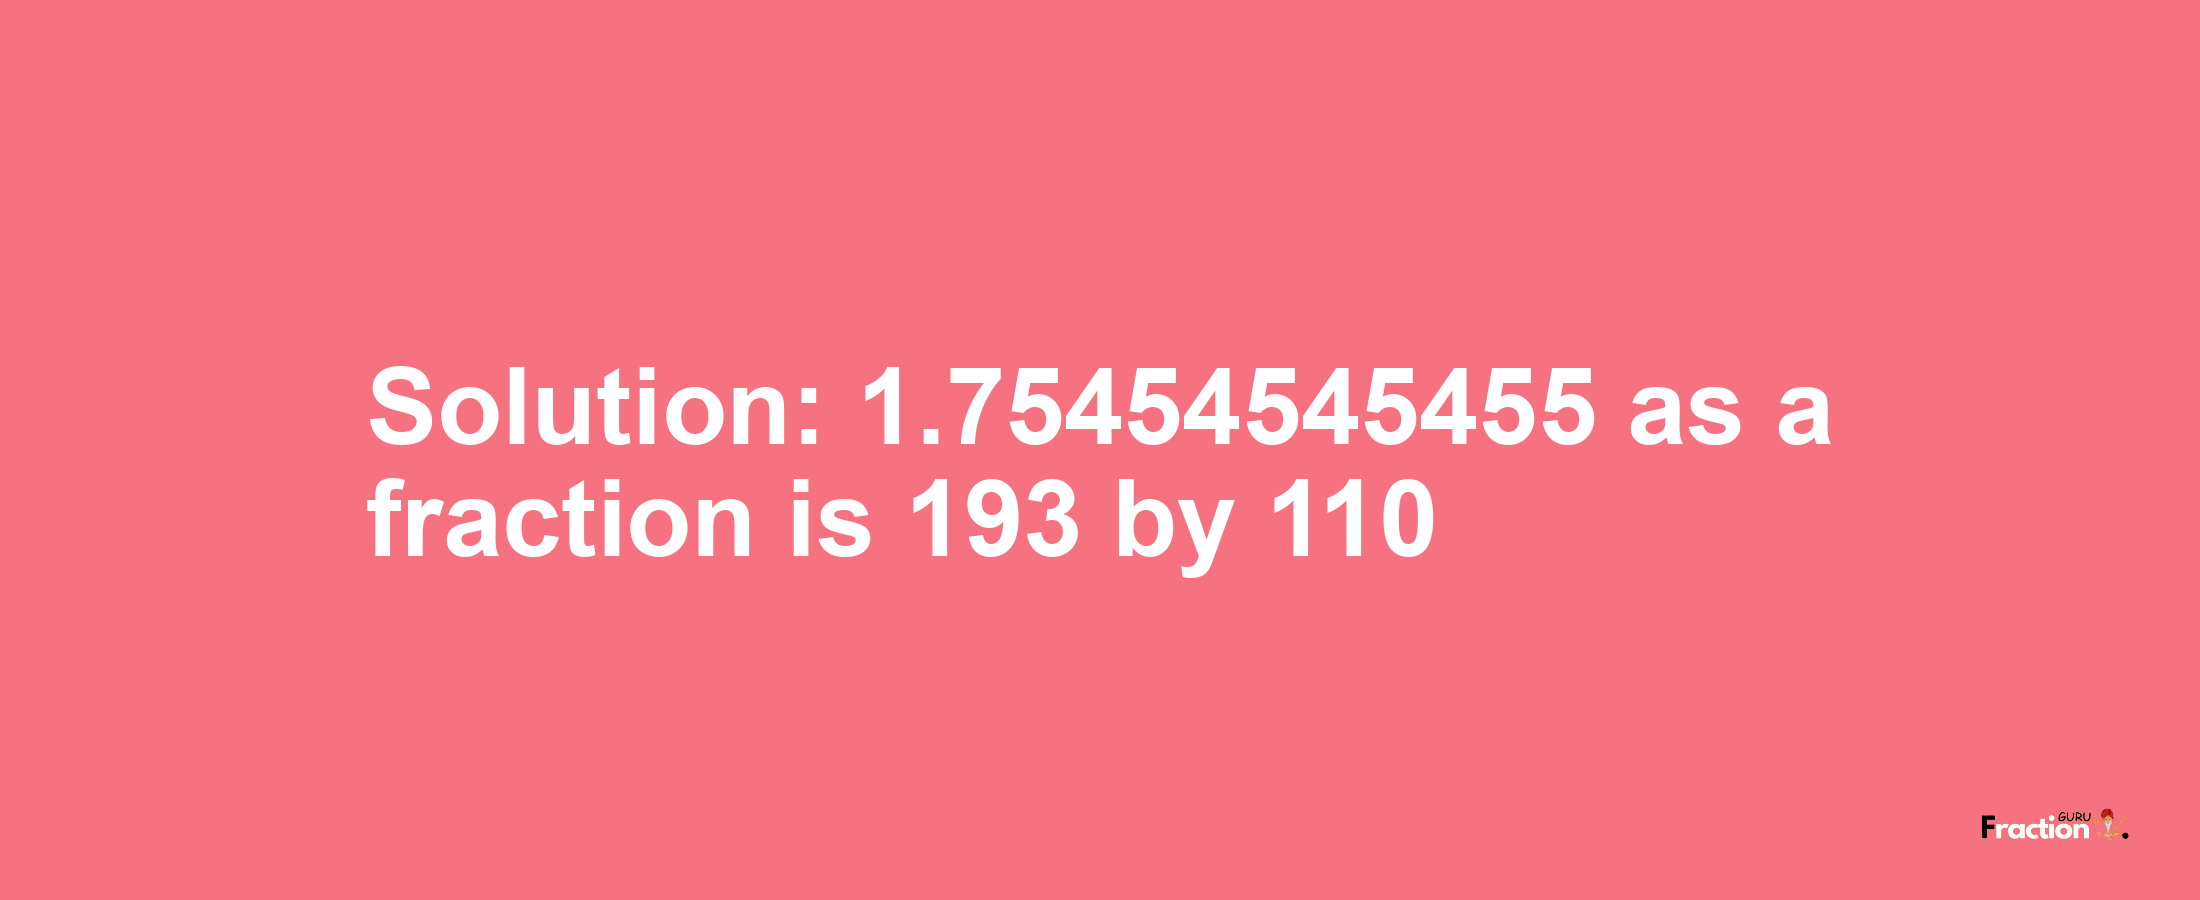 Solution:1.75454545455 as a fraction is 193/110